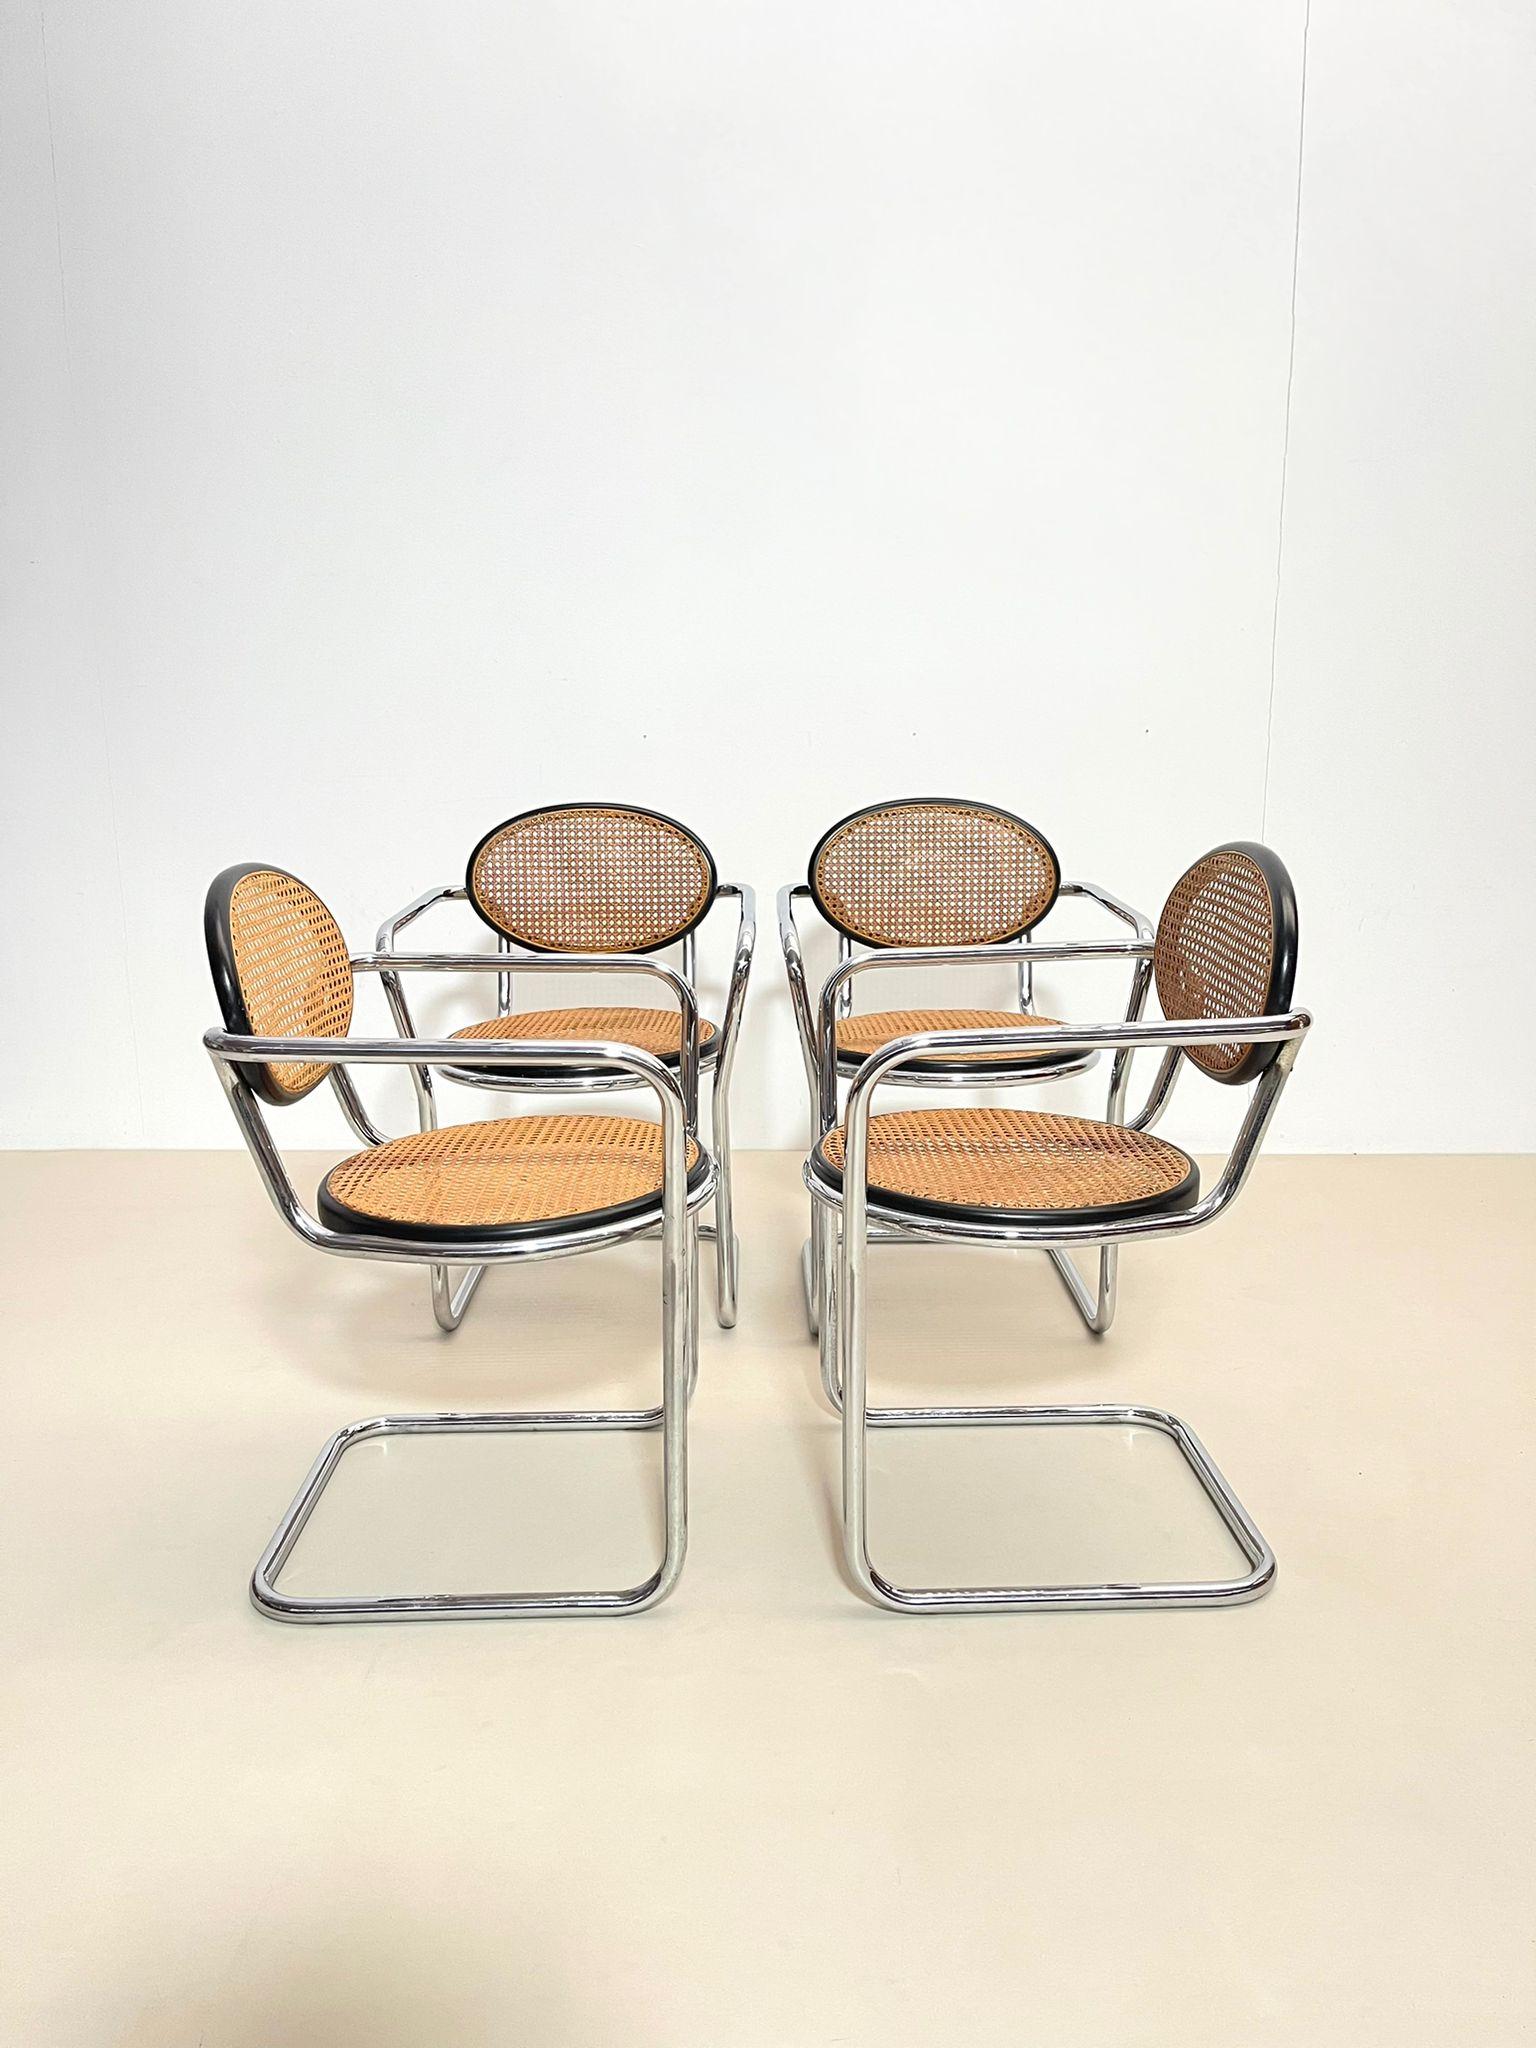 Late 20th Century Mid-Century Modern Set of 4 Armchairs Marcel Breuer Style, Cane and Chrome 